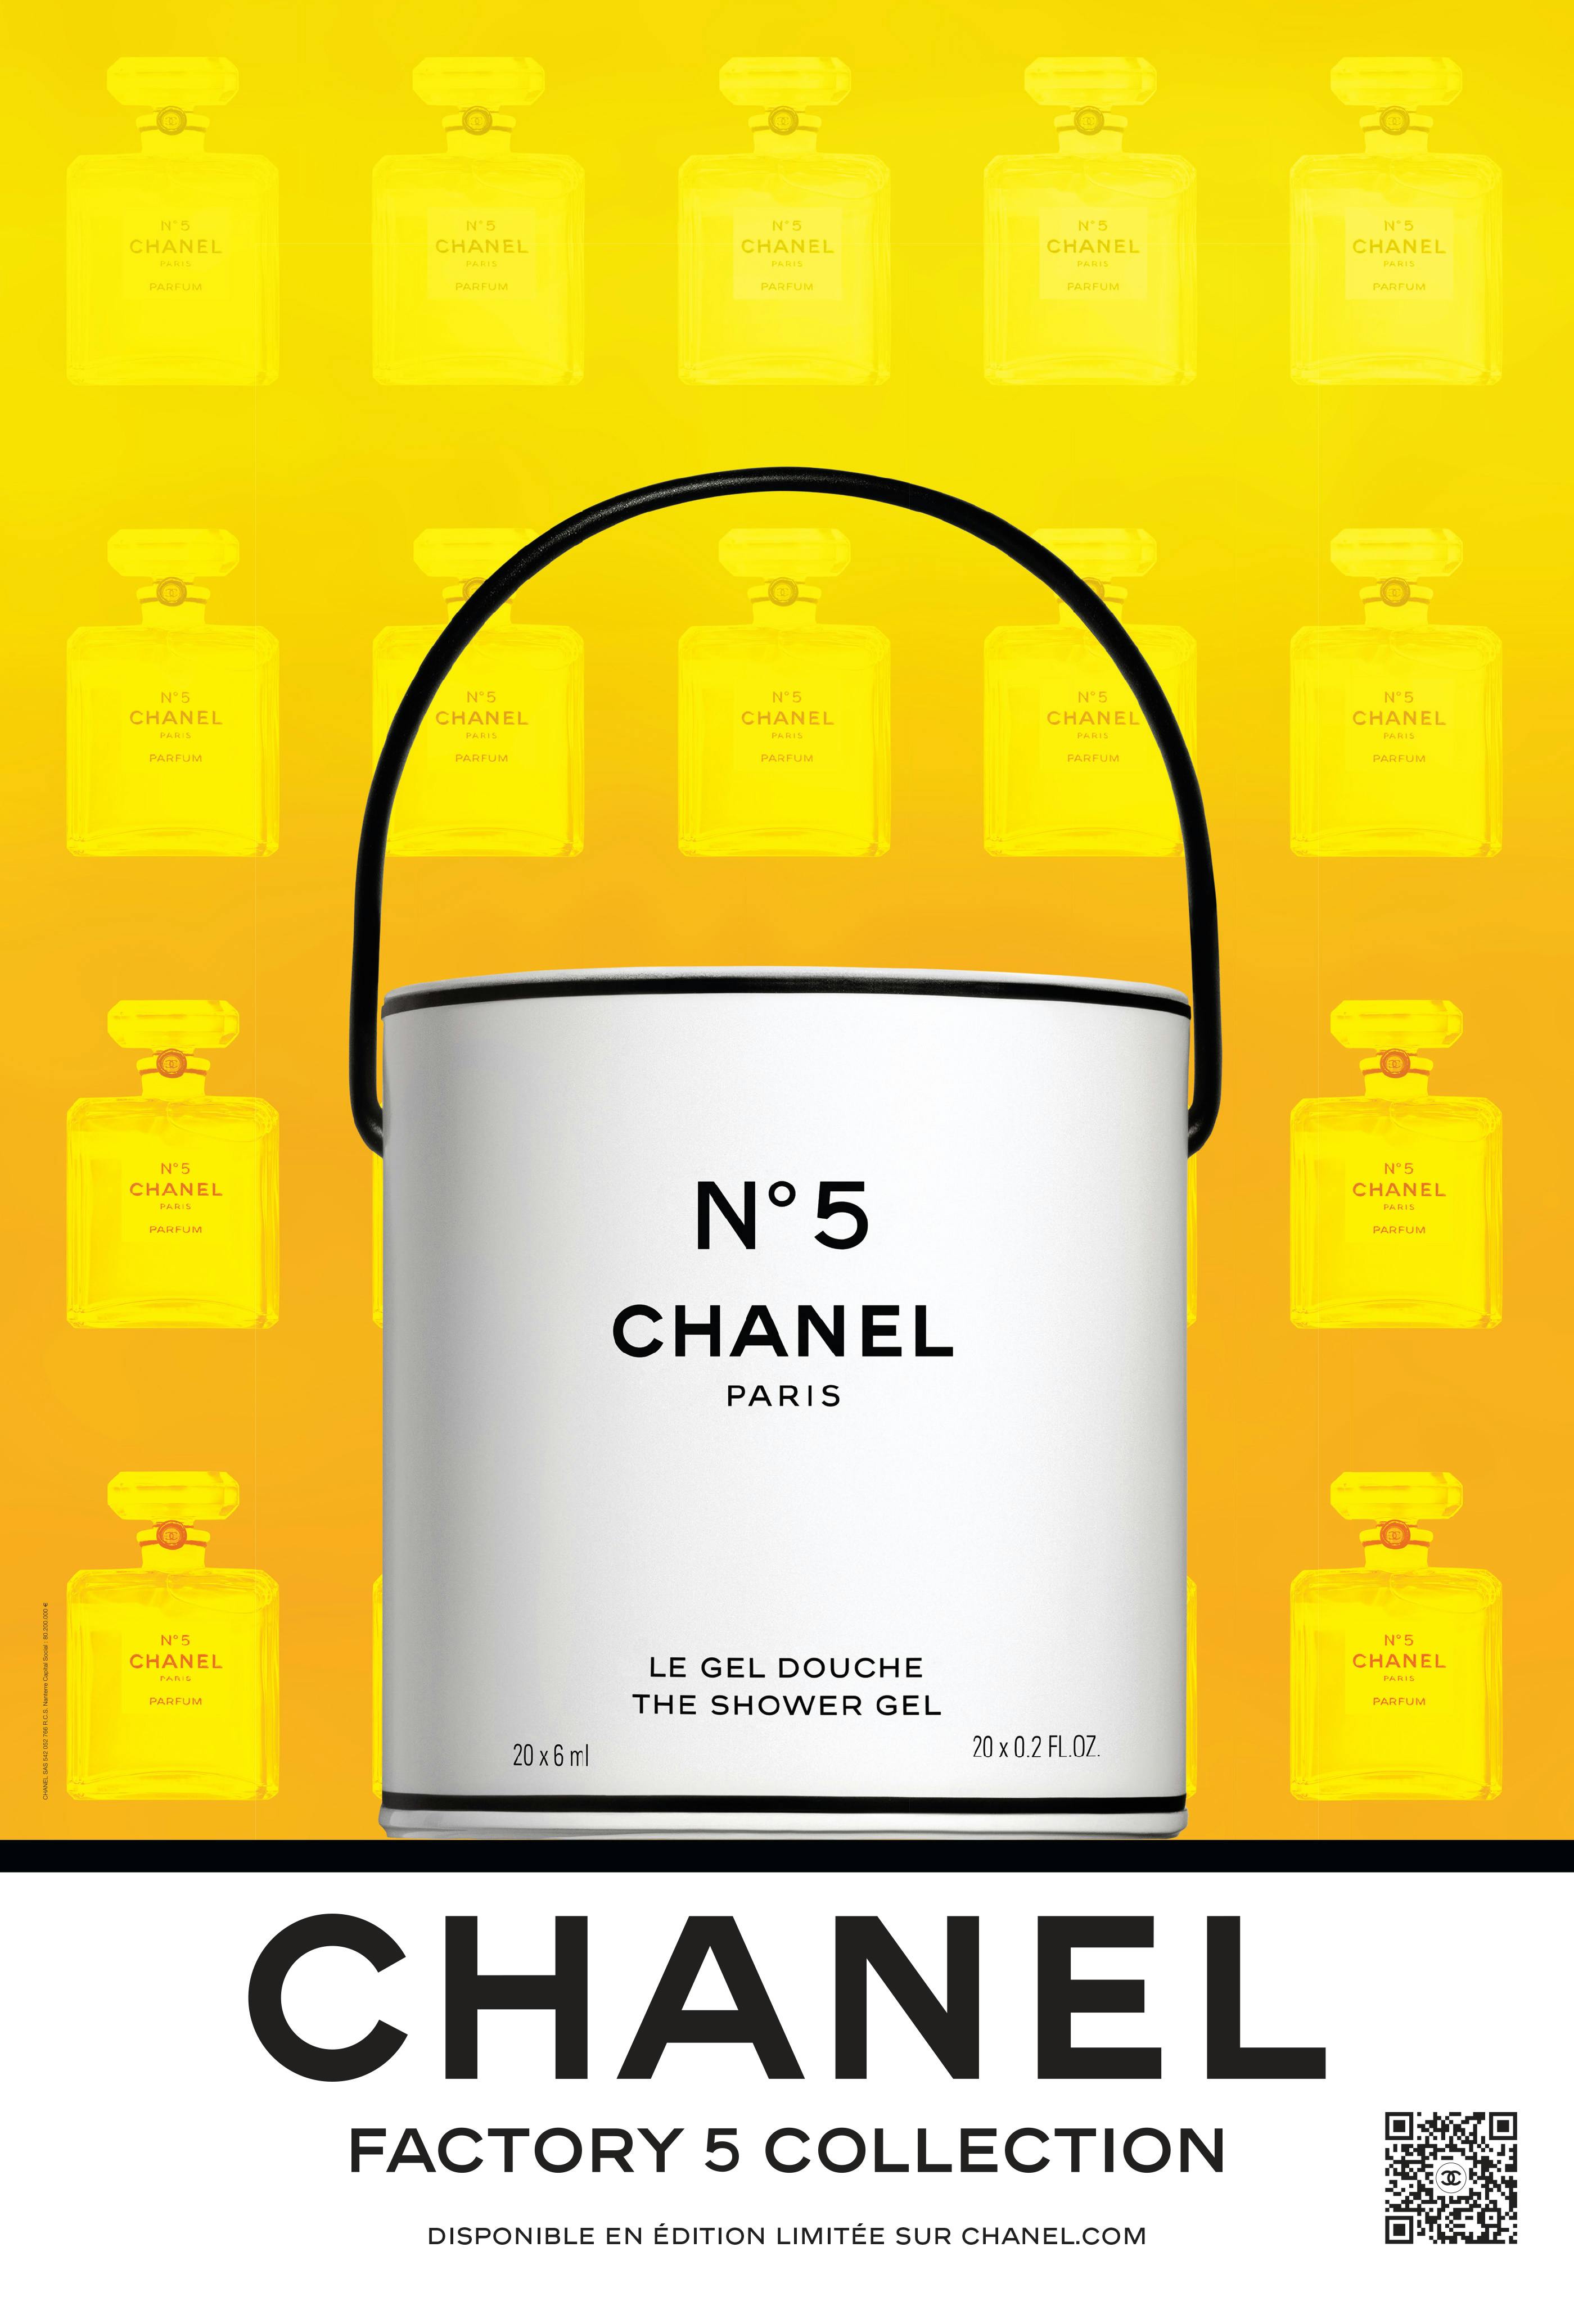 Chanel Celebrates 100 Years of N°5 with Factory 5 Collection